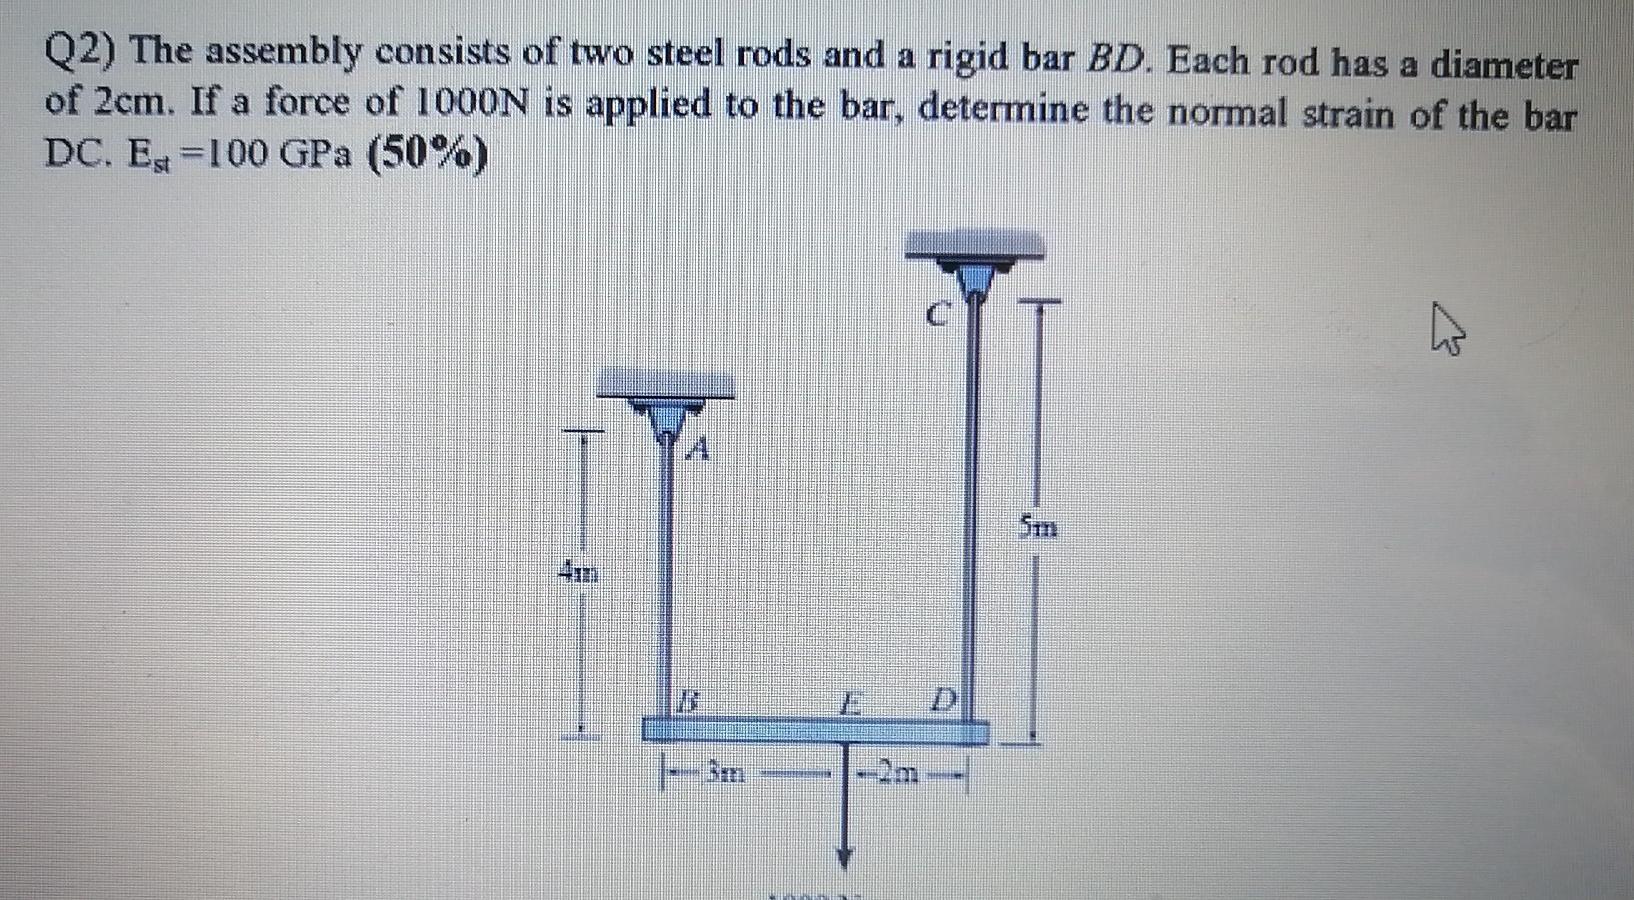 Q2 The Assembly Consists Of Two Steel Rods And A Rigid Bar Bd Each Rod Has A Diameter Of 2cm If A Force Of 1000n Is A 1